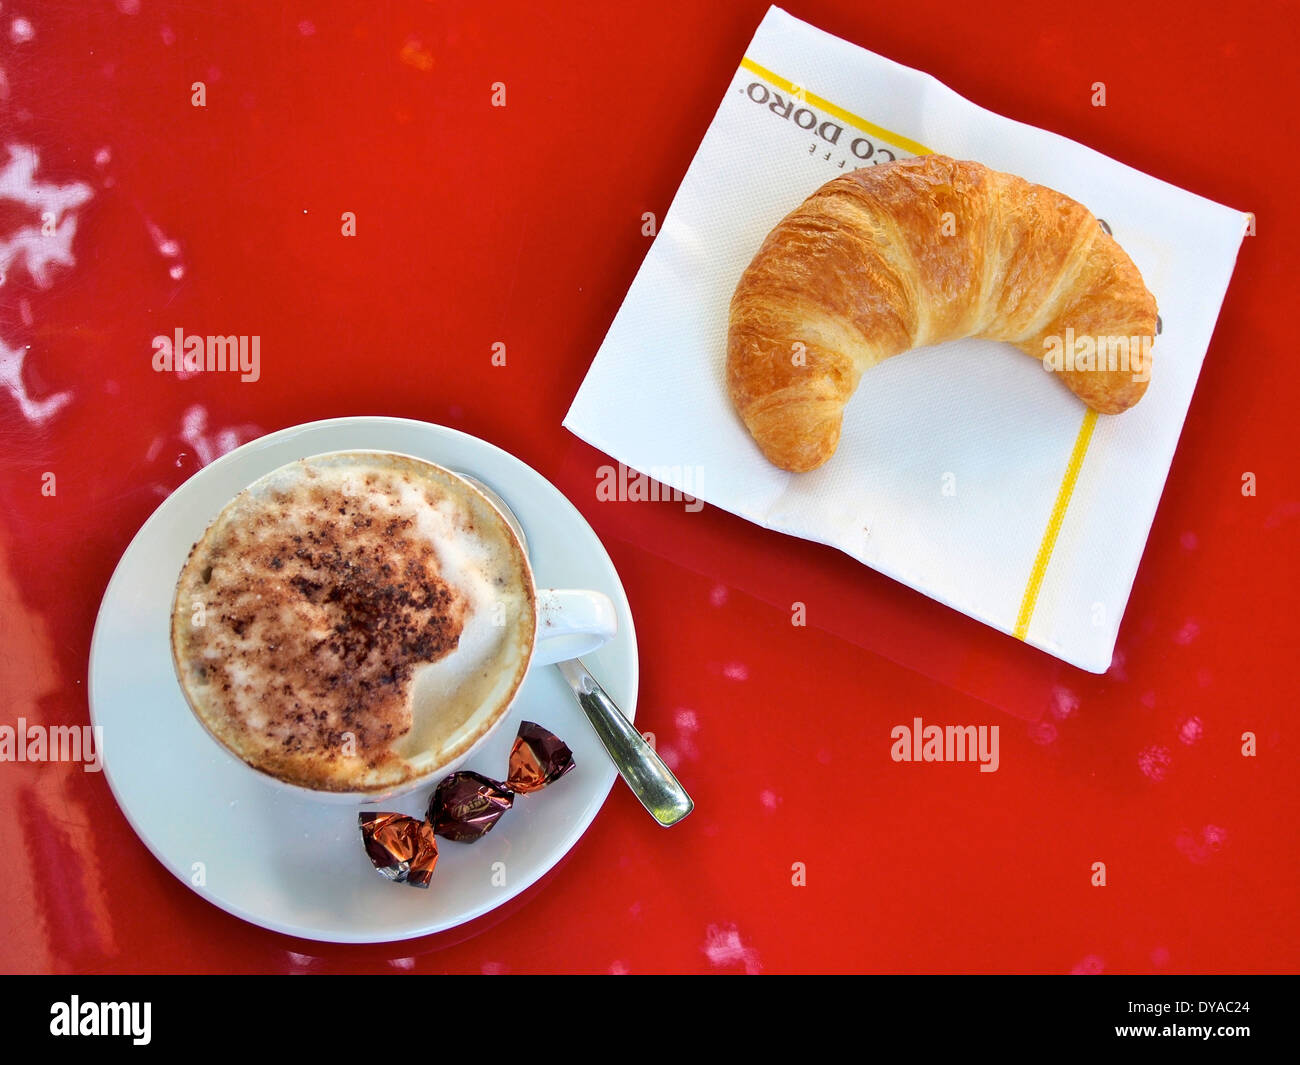 Cappuccino, coffee, chocolate, croissant, bread, spoon, napkin, cup, plate, Food, Stock Photo